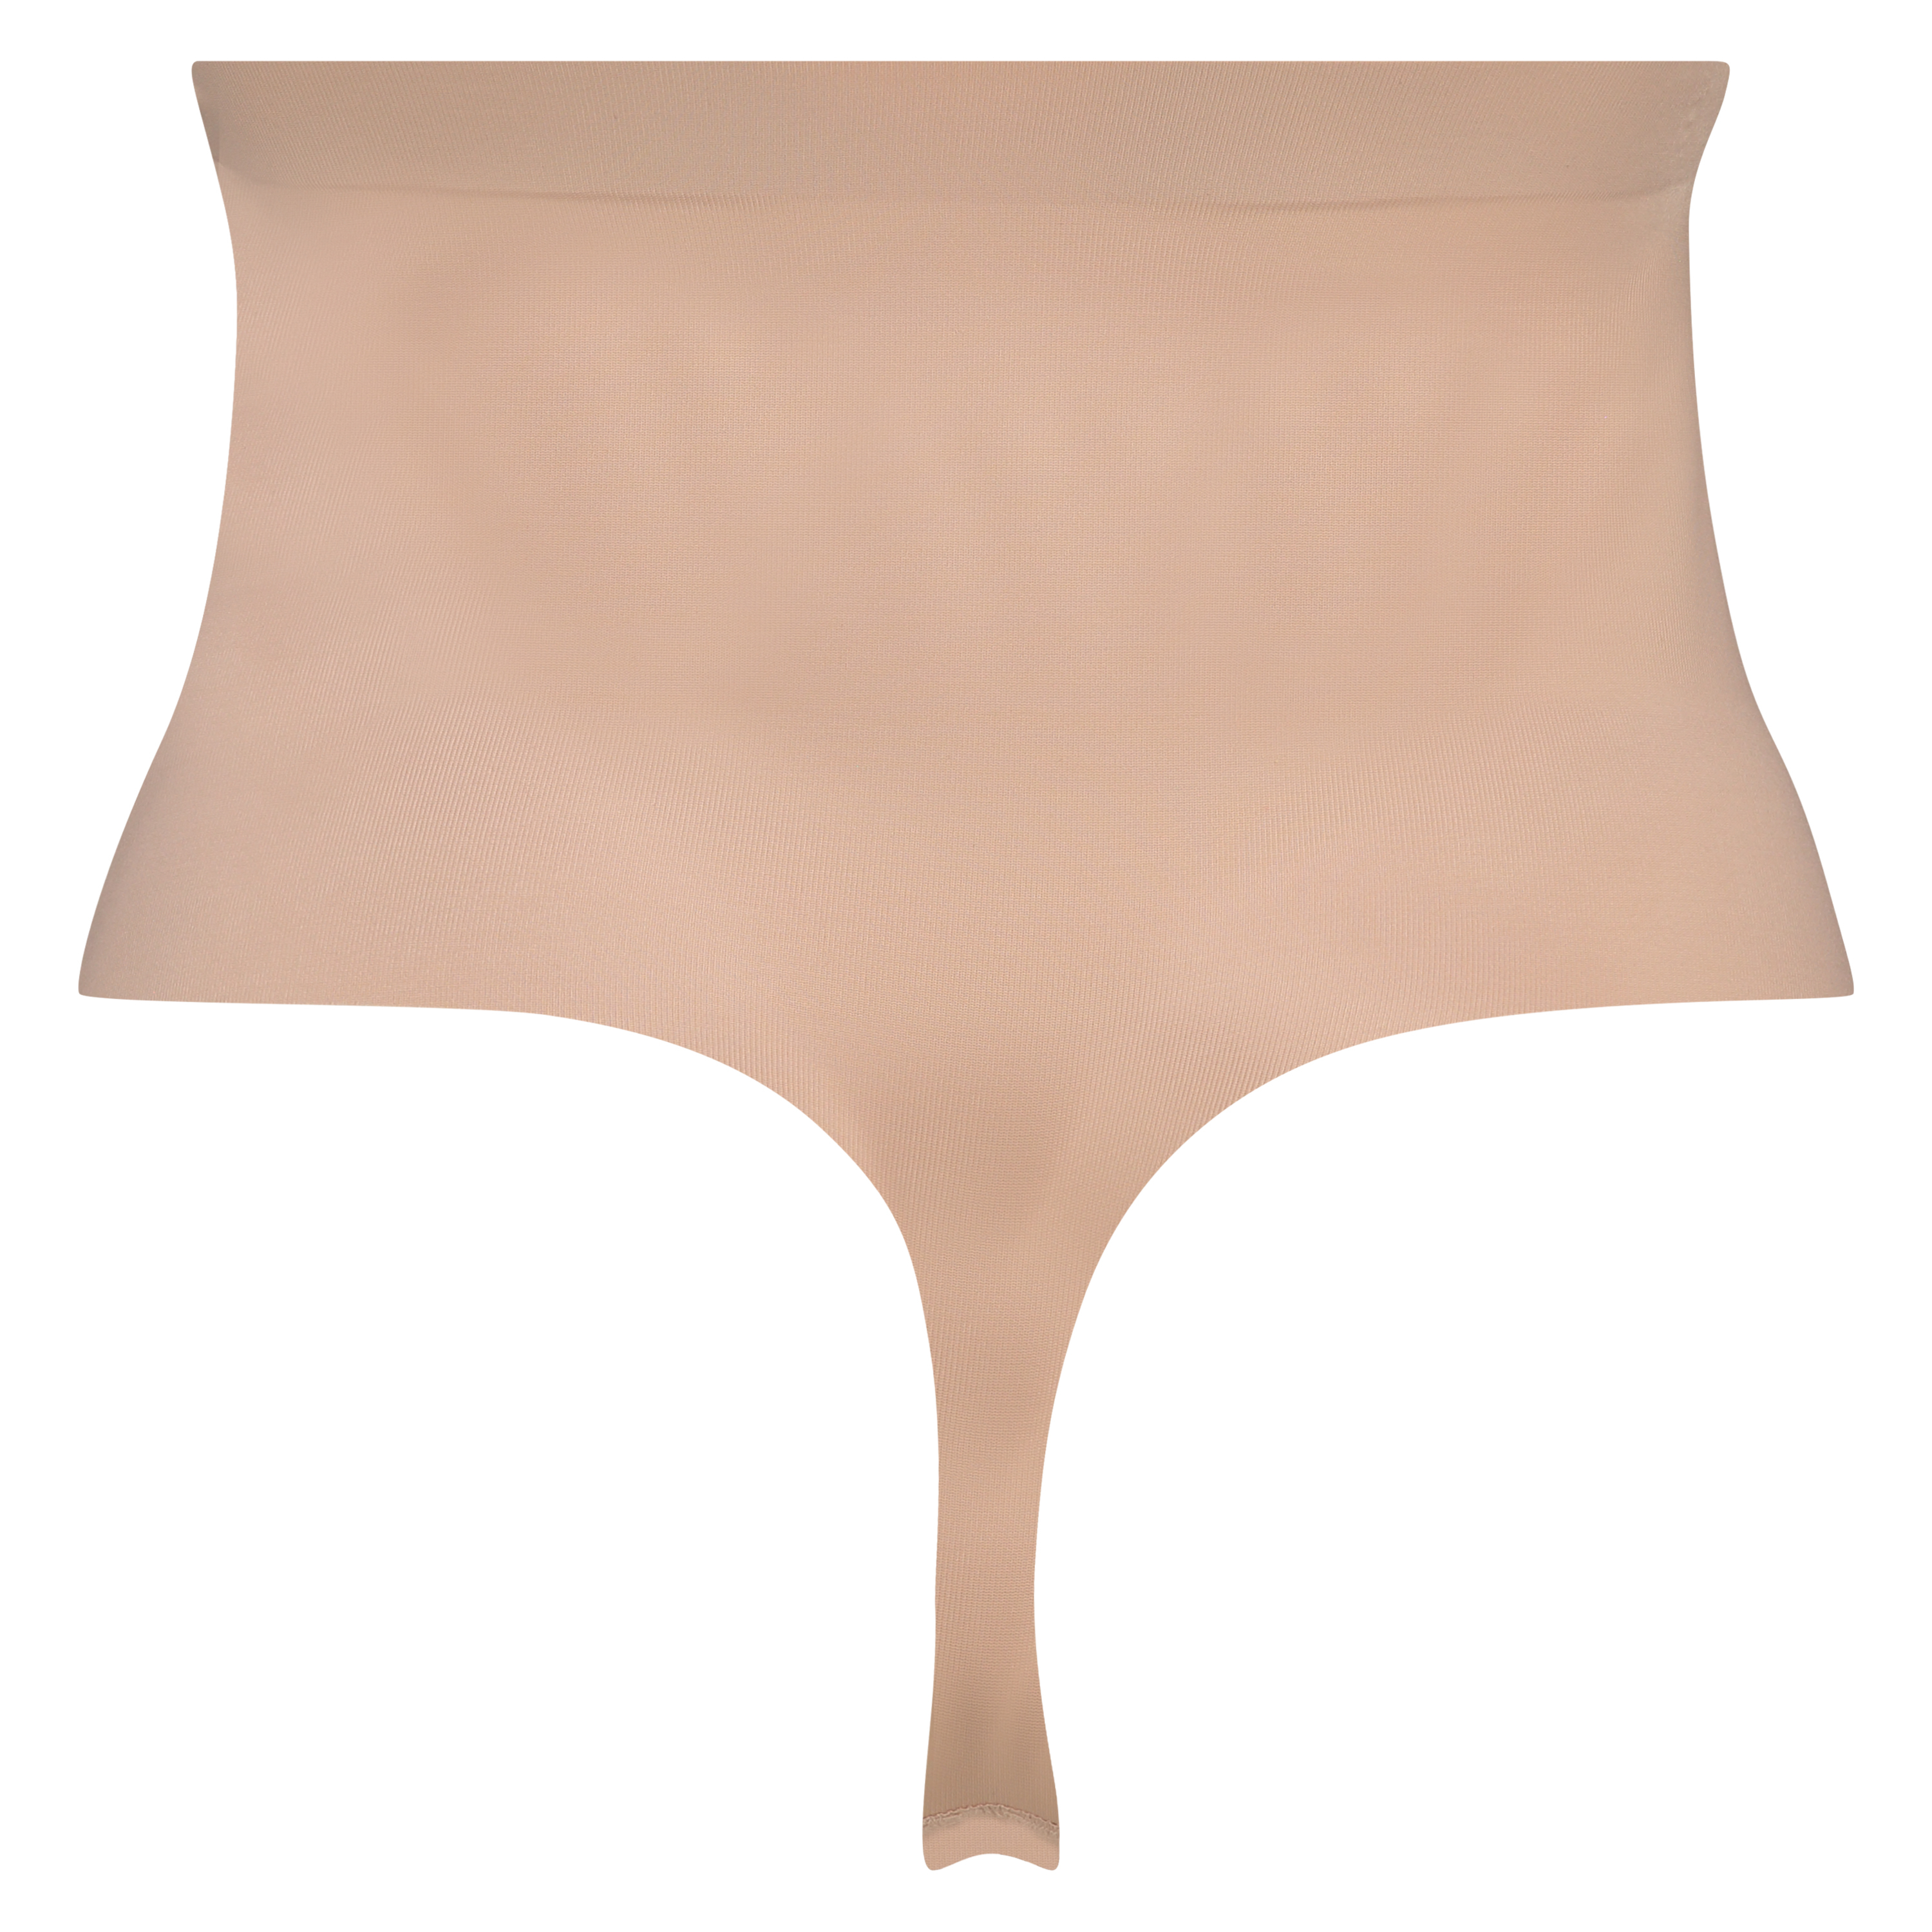 Formender Scuba-Tanga mit hoher Taille - Level 3, Beige, main